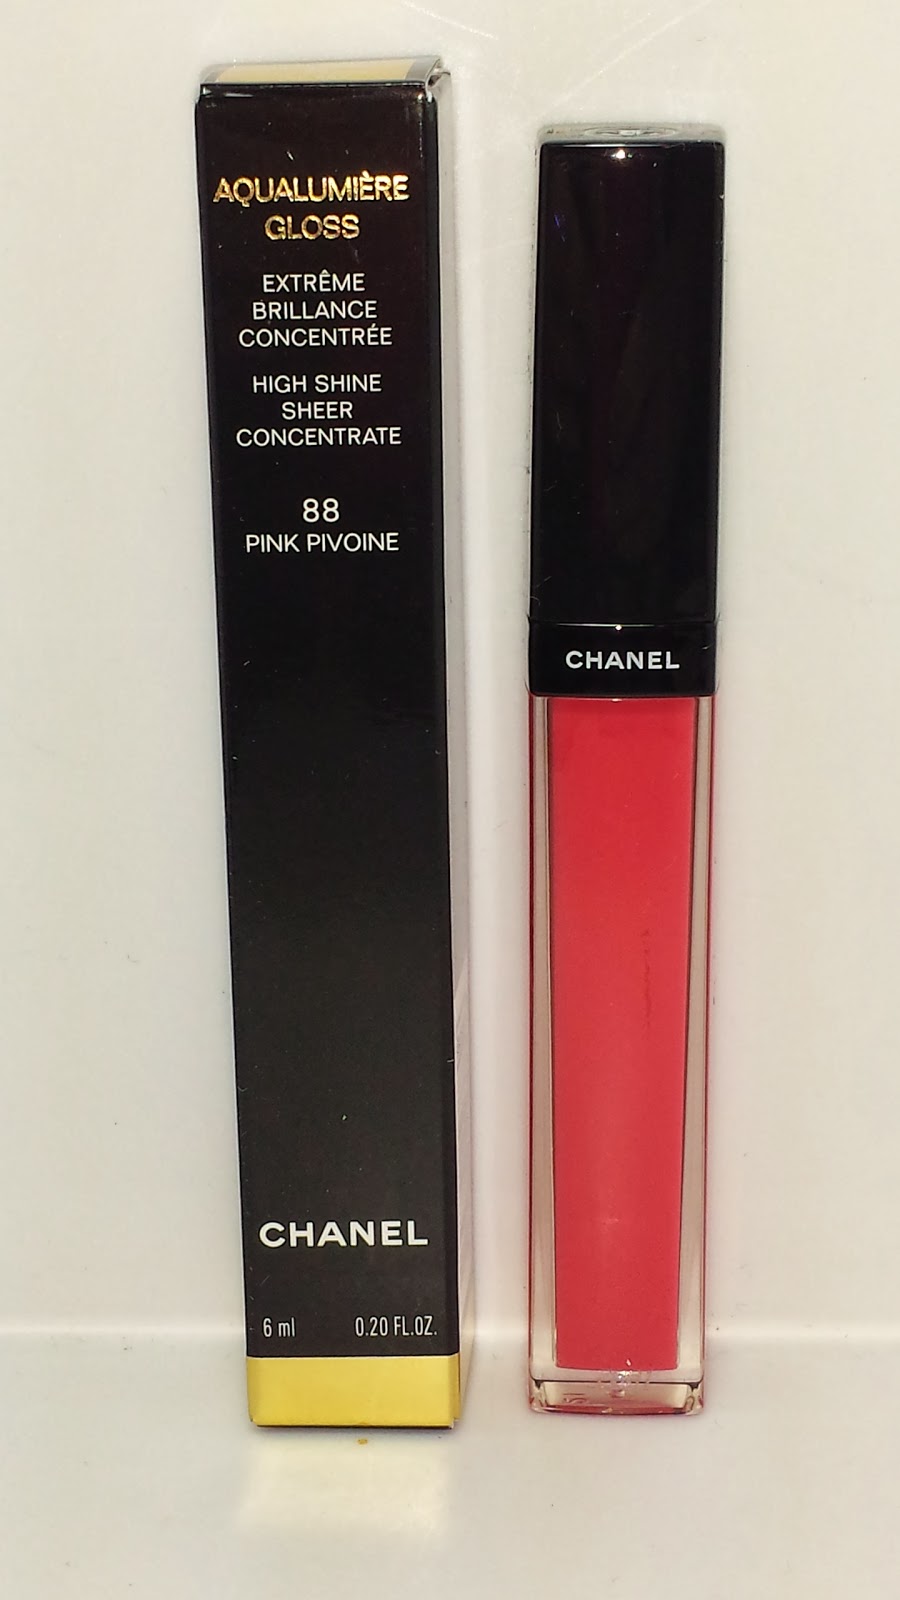 Jayded Dreaming Beauty Blog : 88 PINK PIVOINE CHANEL AQUALUMIÈRE GLOSS -  SWATCHES AND REVIEW